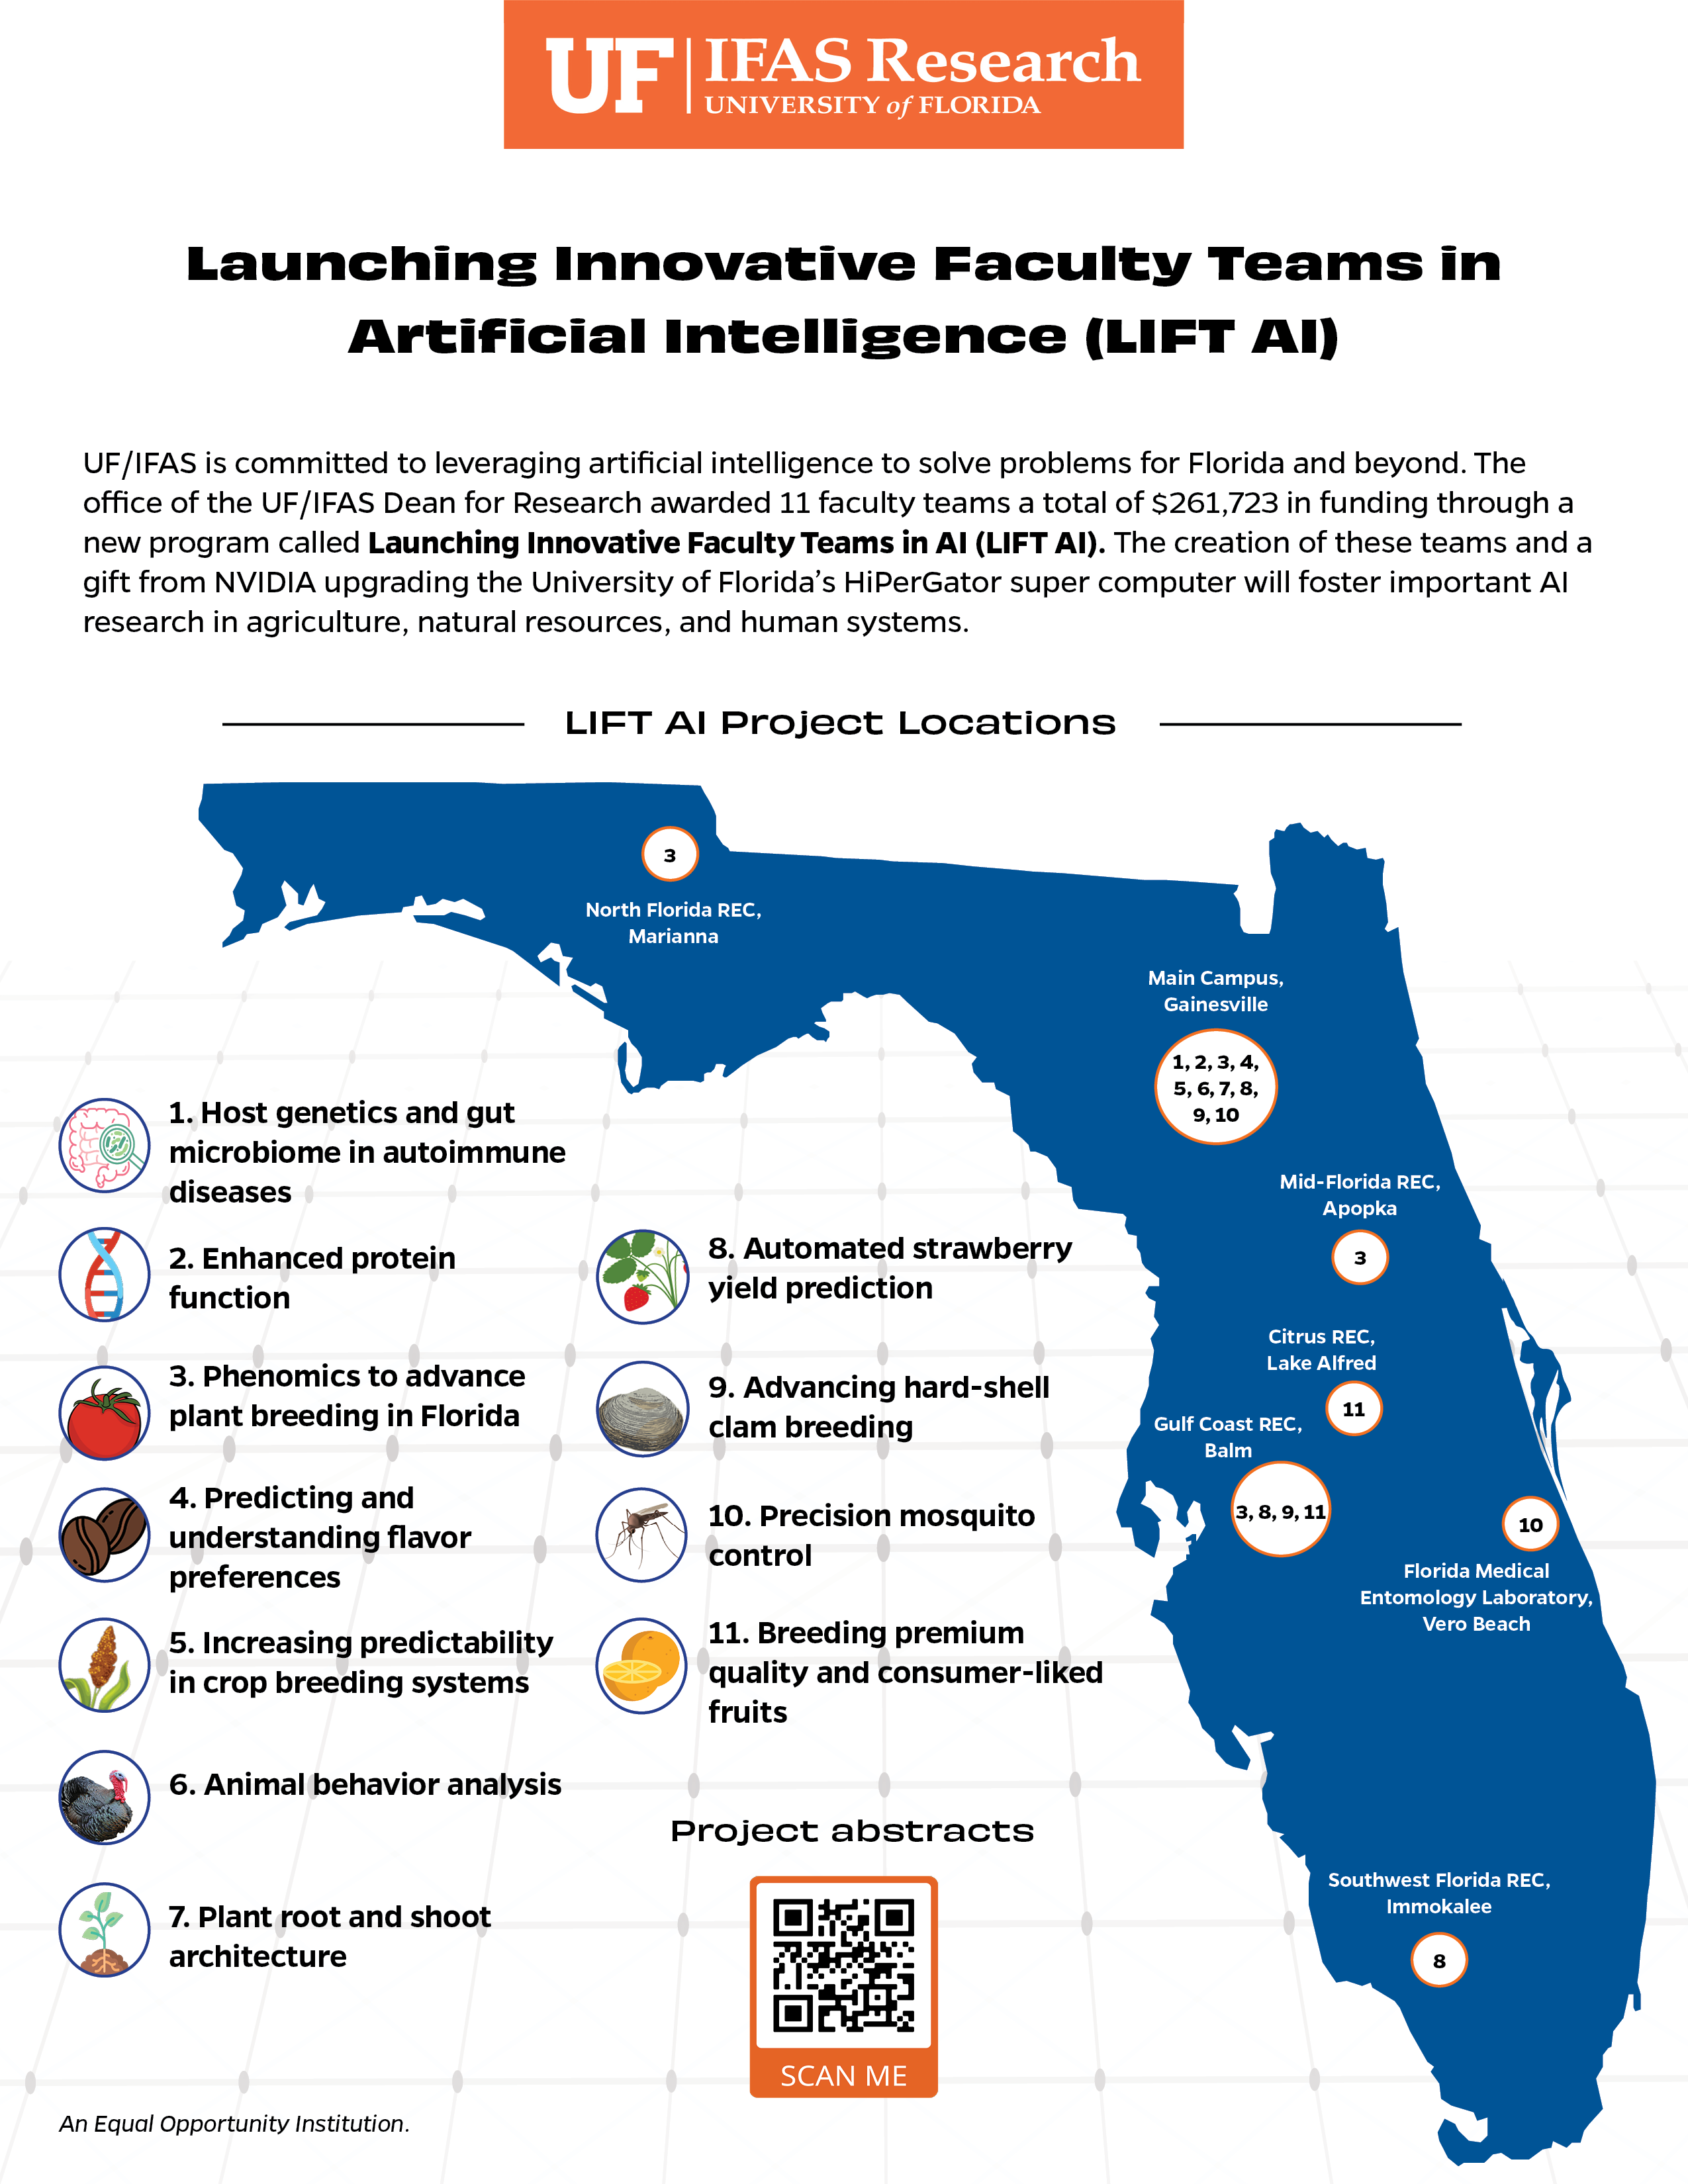 Map of LIFT AI projects around Florida.